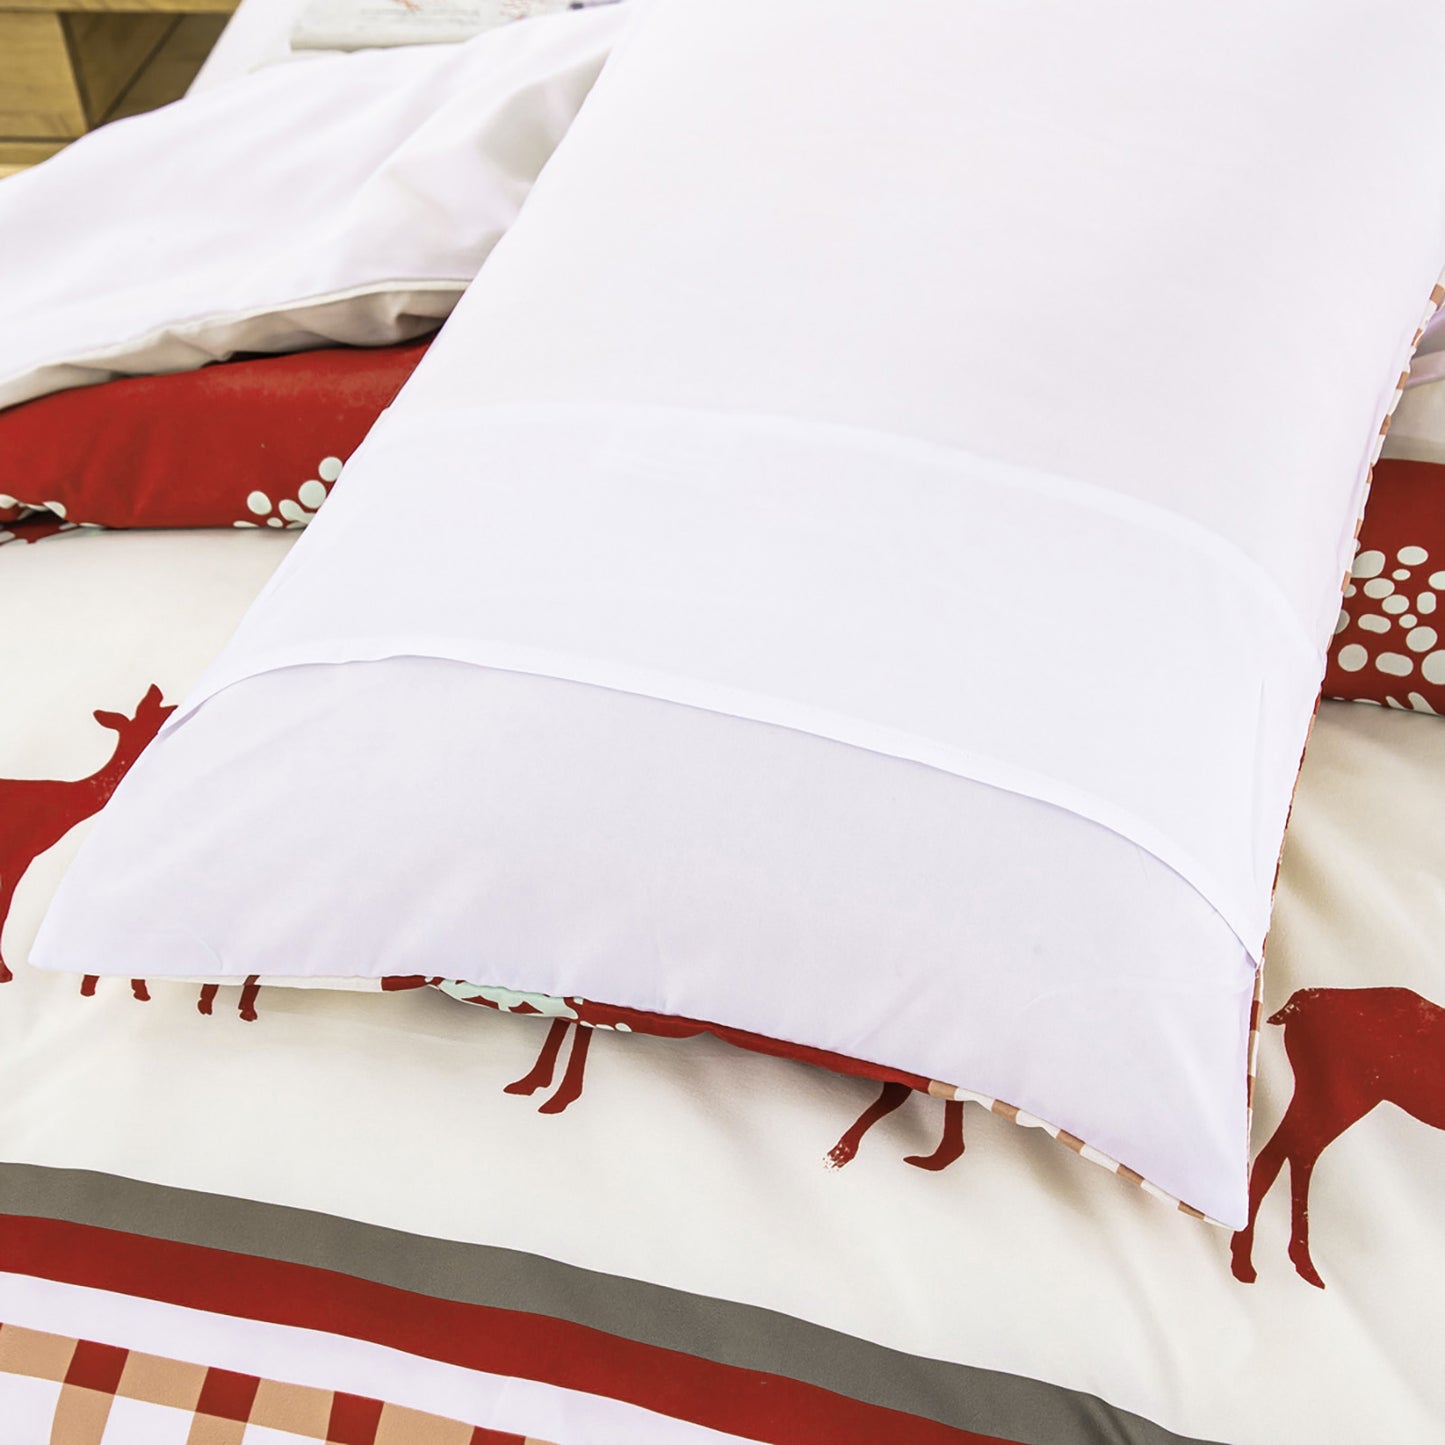 Christmas Duvet Cover Set With 2 Pillow Cases